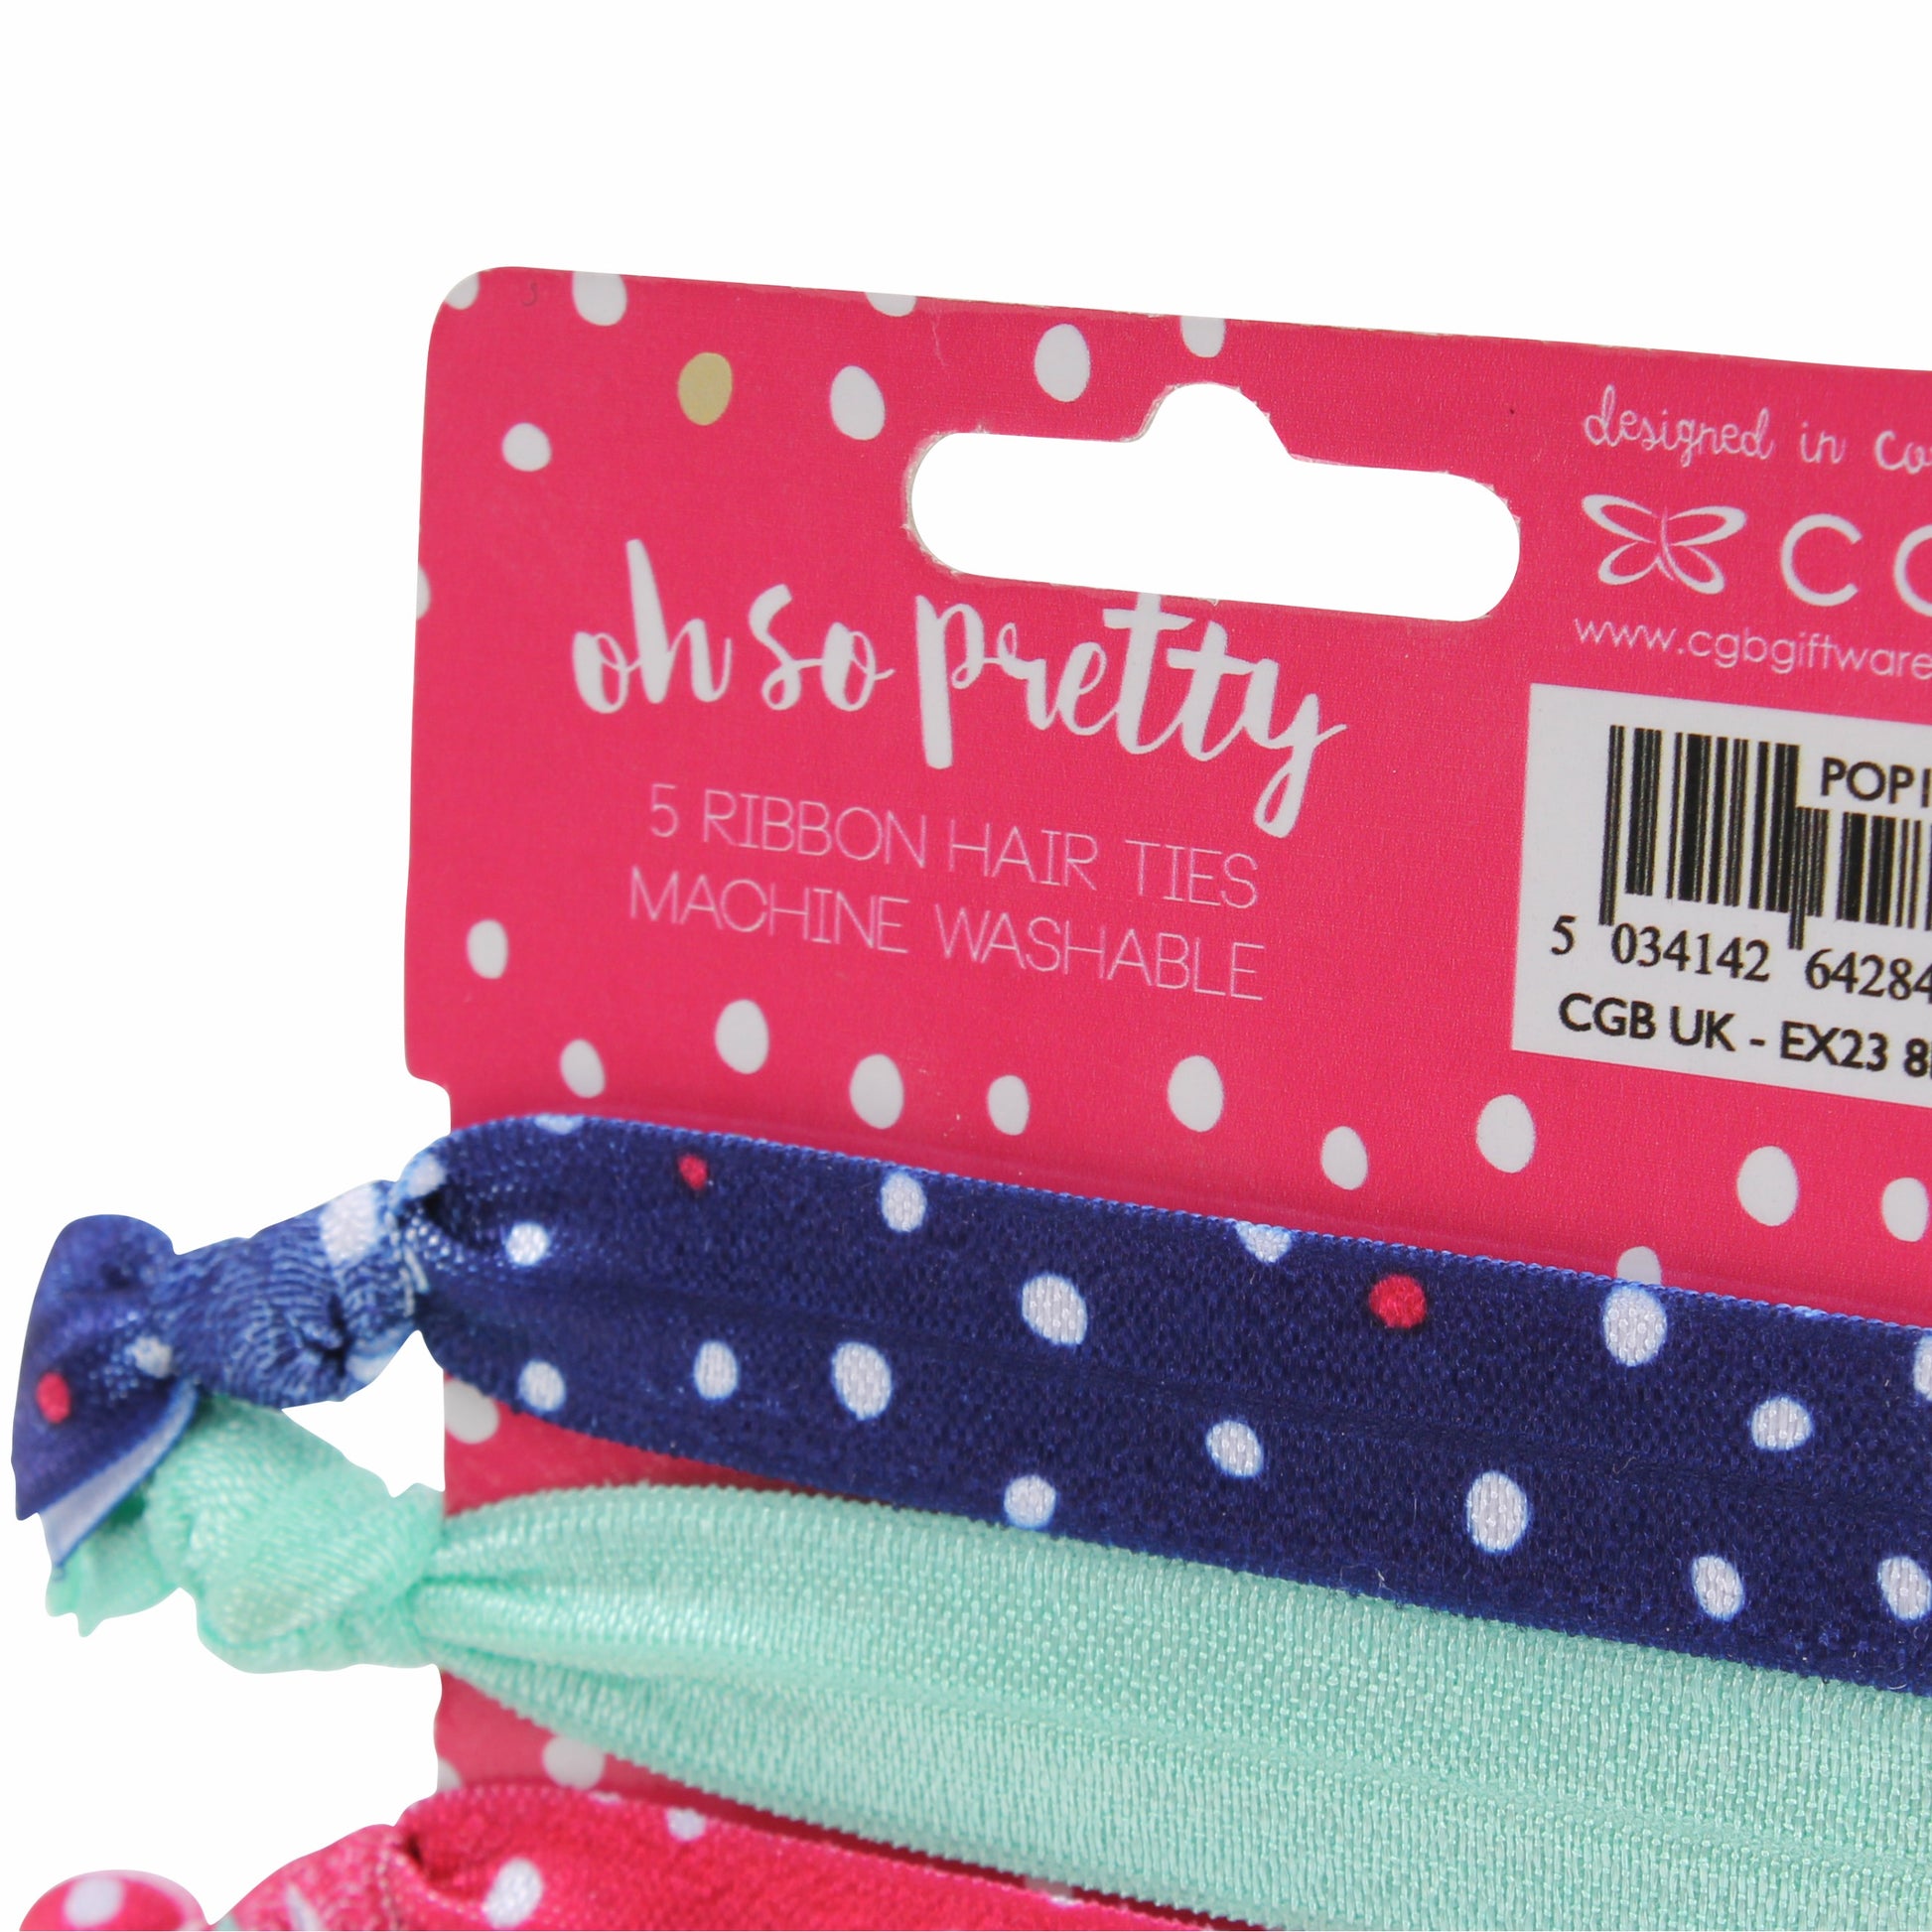 Oh so pretty elastic bands in vibrant colours and designs.  Suitable for hair and wrist.